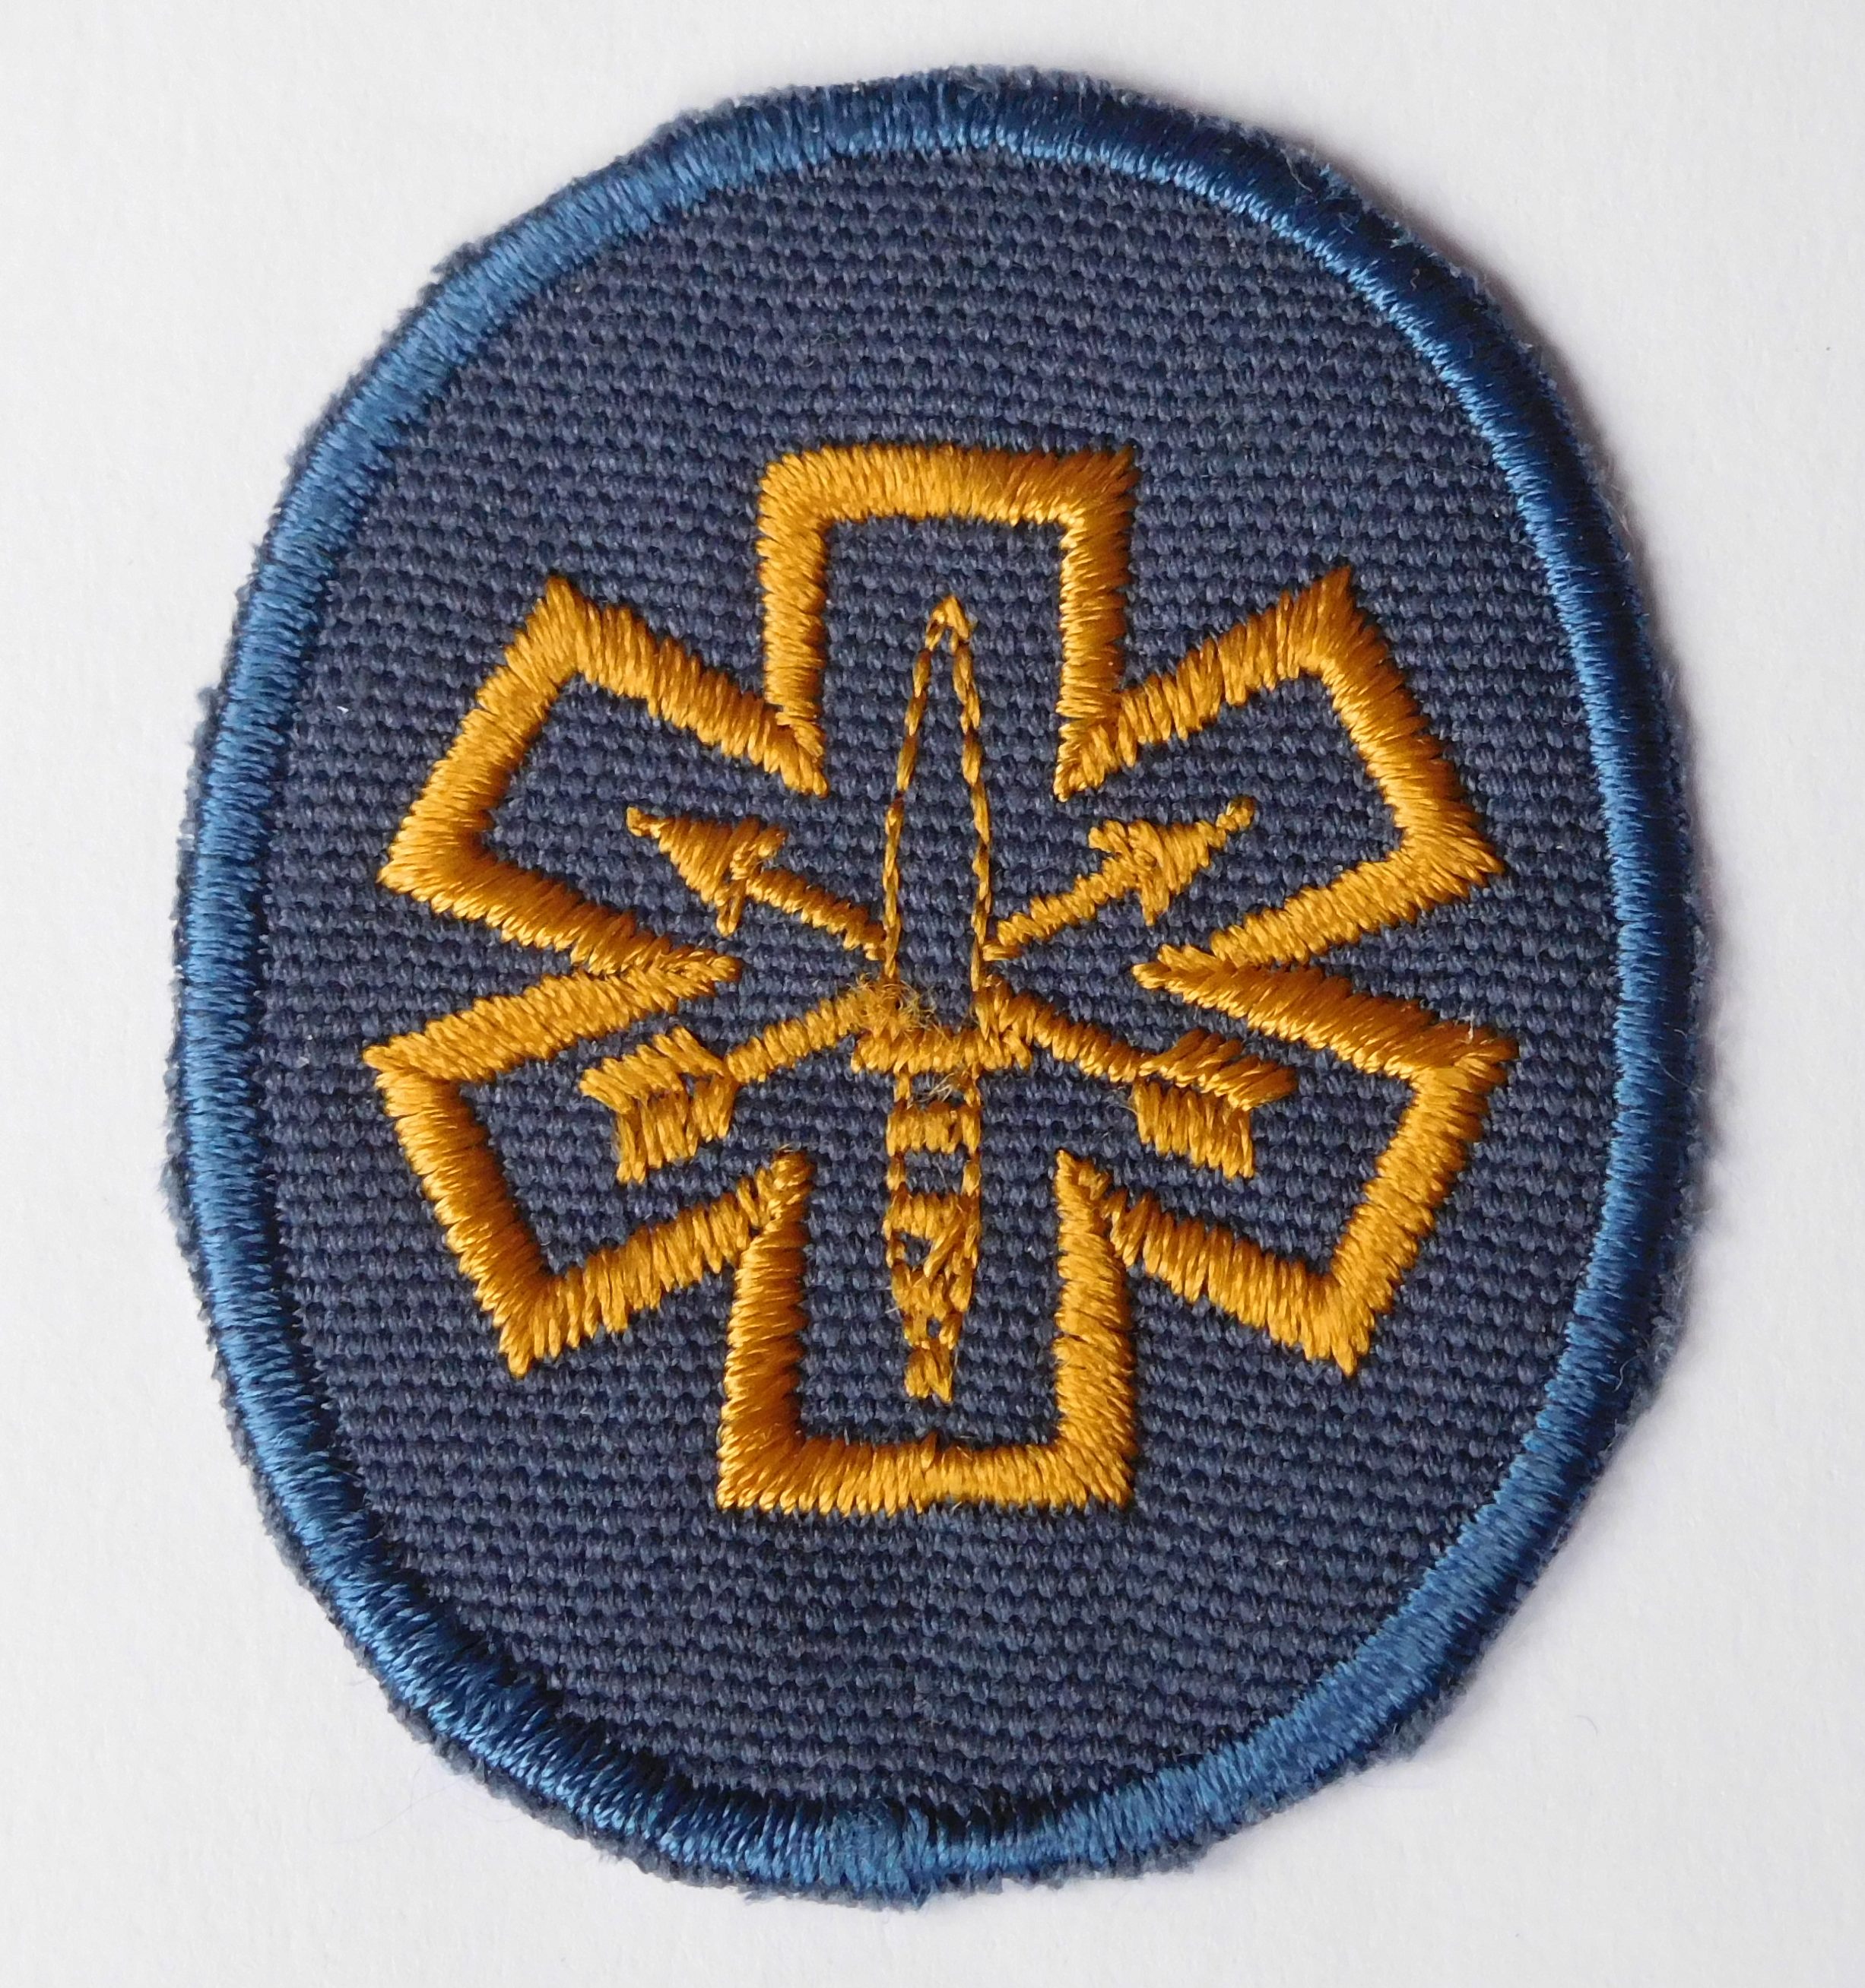 SOUTH AFRICA POLICE JOHANNESBURG FLYING SQUAD MEDICAL UNIT vintage BADGE PATCH (BLUE / YELLOW)